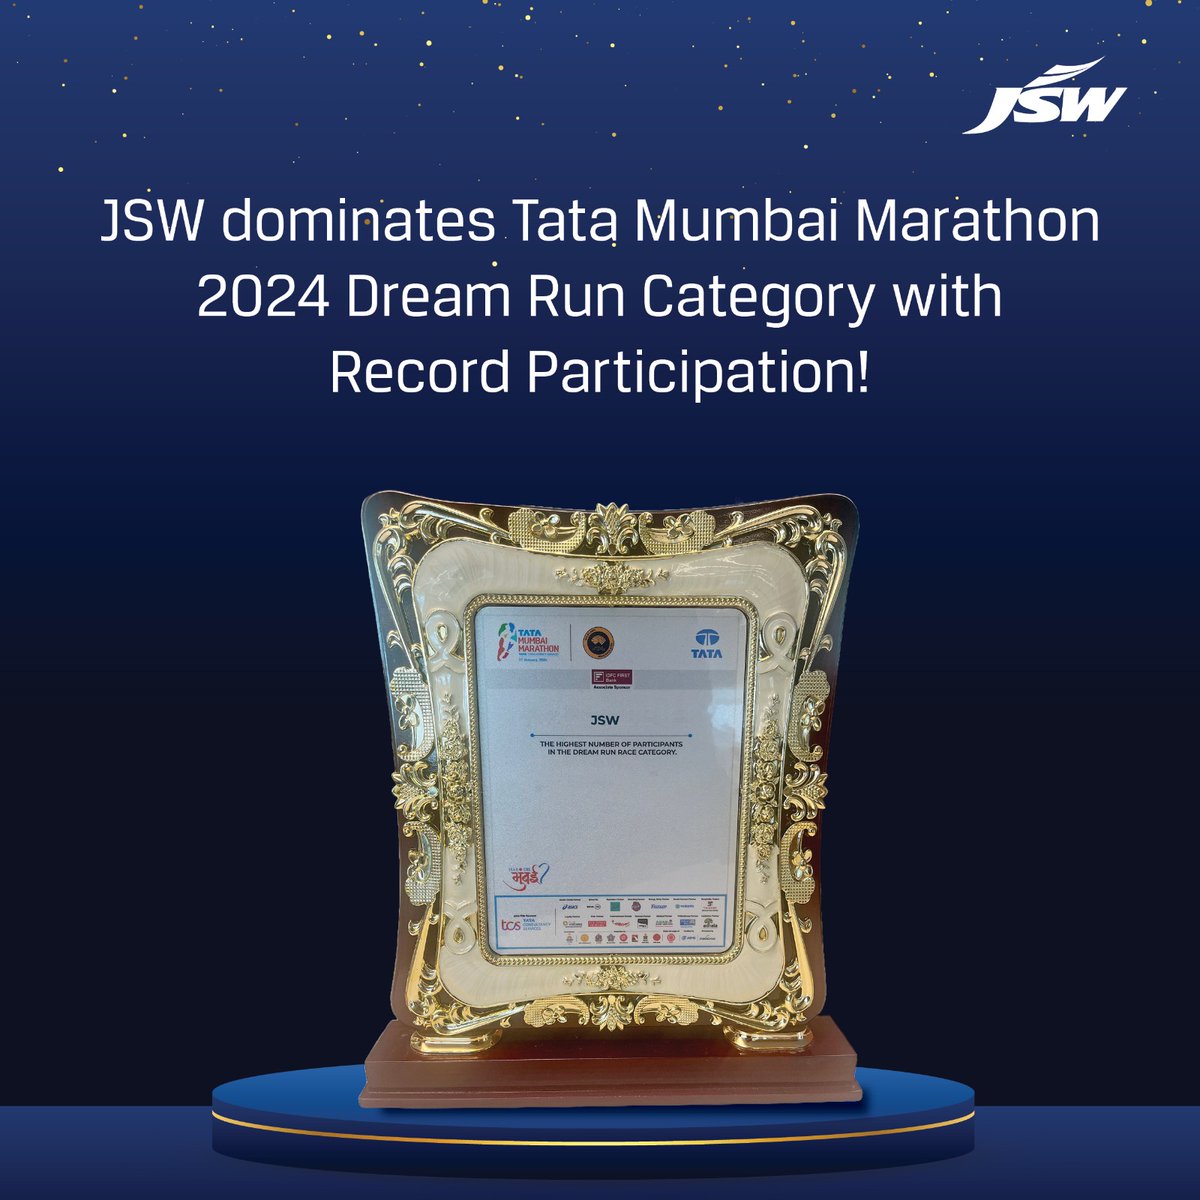 We are happy to share that the JSW Group has been honored for achieving the highest participation in the Tata Mumbai Marathon 2024 Dream Run! 🏆 A huge thank you to everyone in the team who joined us in this exciting event! #DreamRun #JSWGroup #WellnessWins…